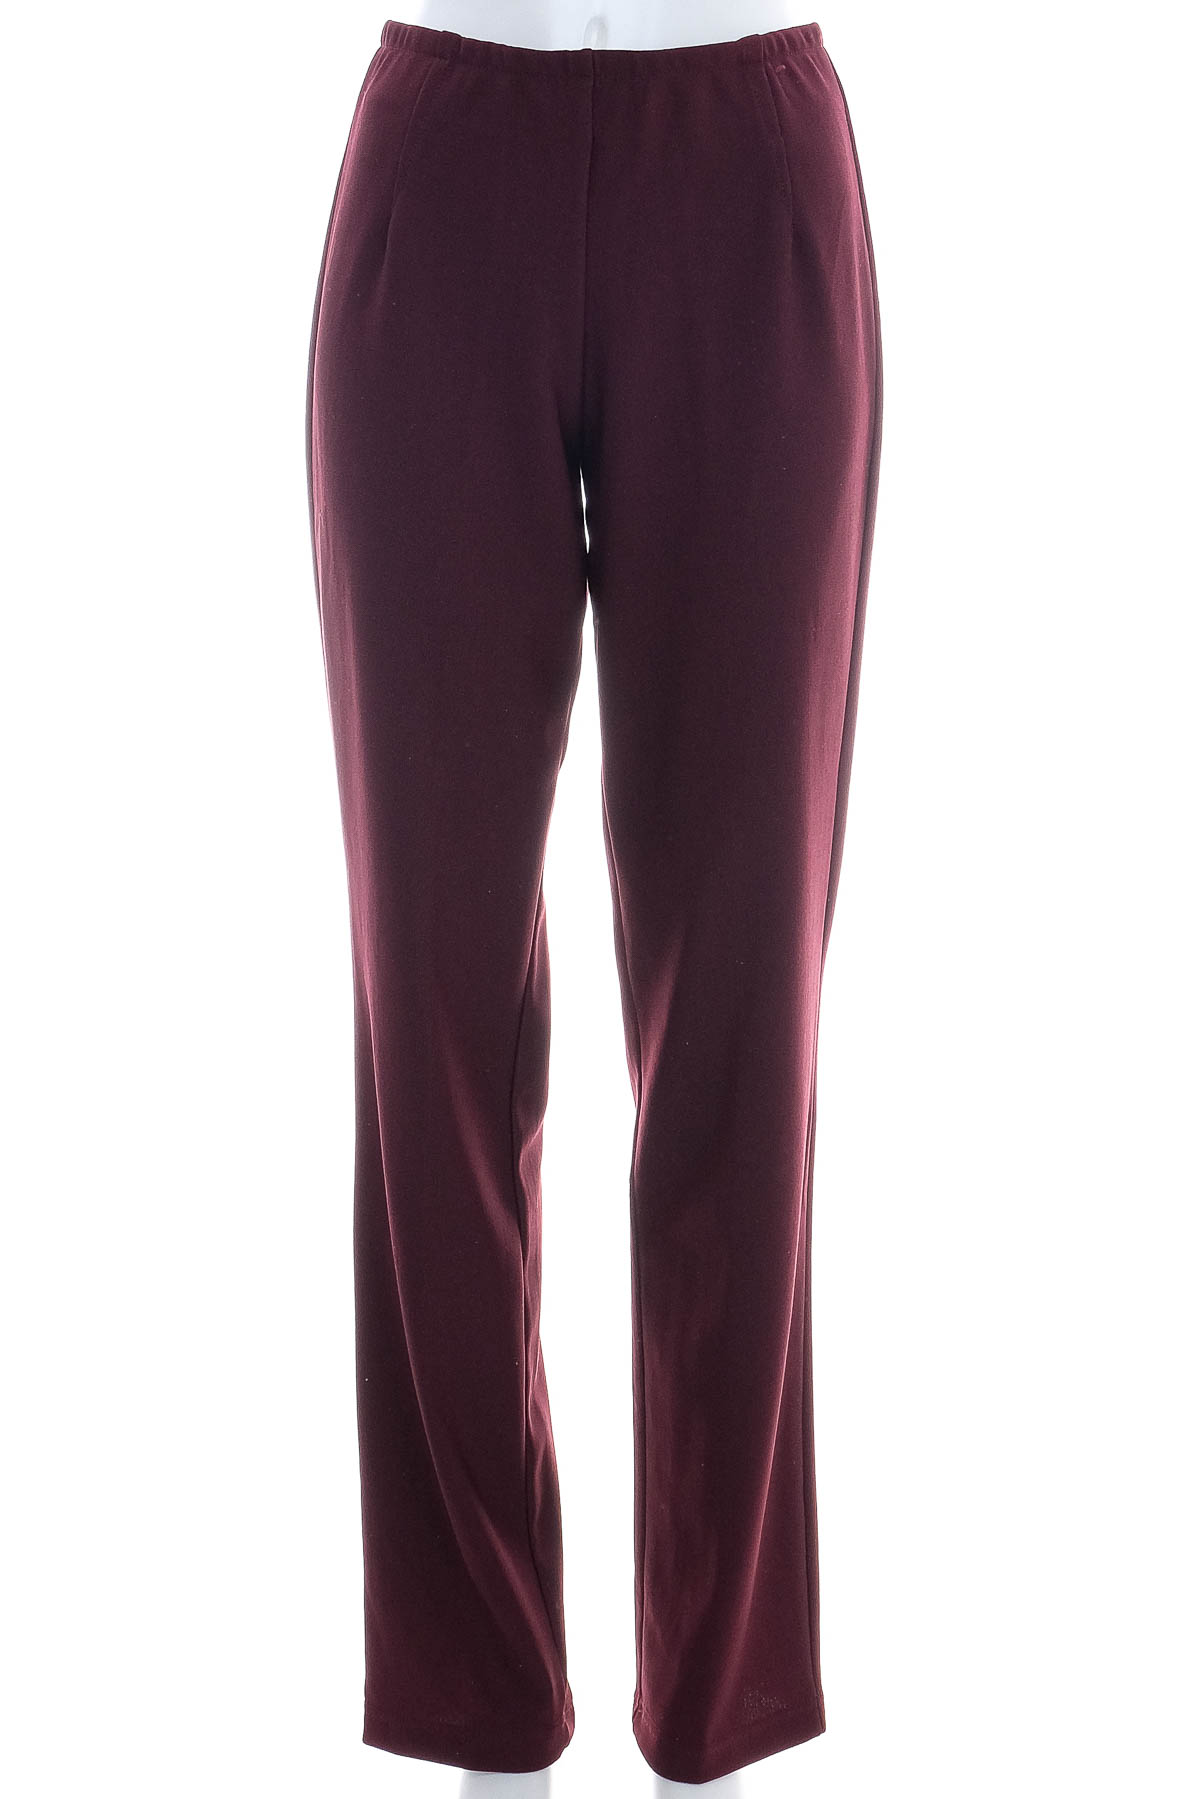 Women's trousers - Courtly - 0